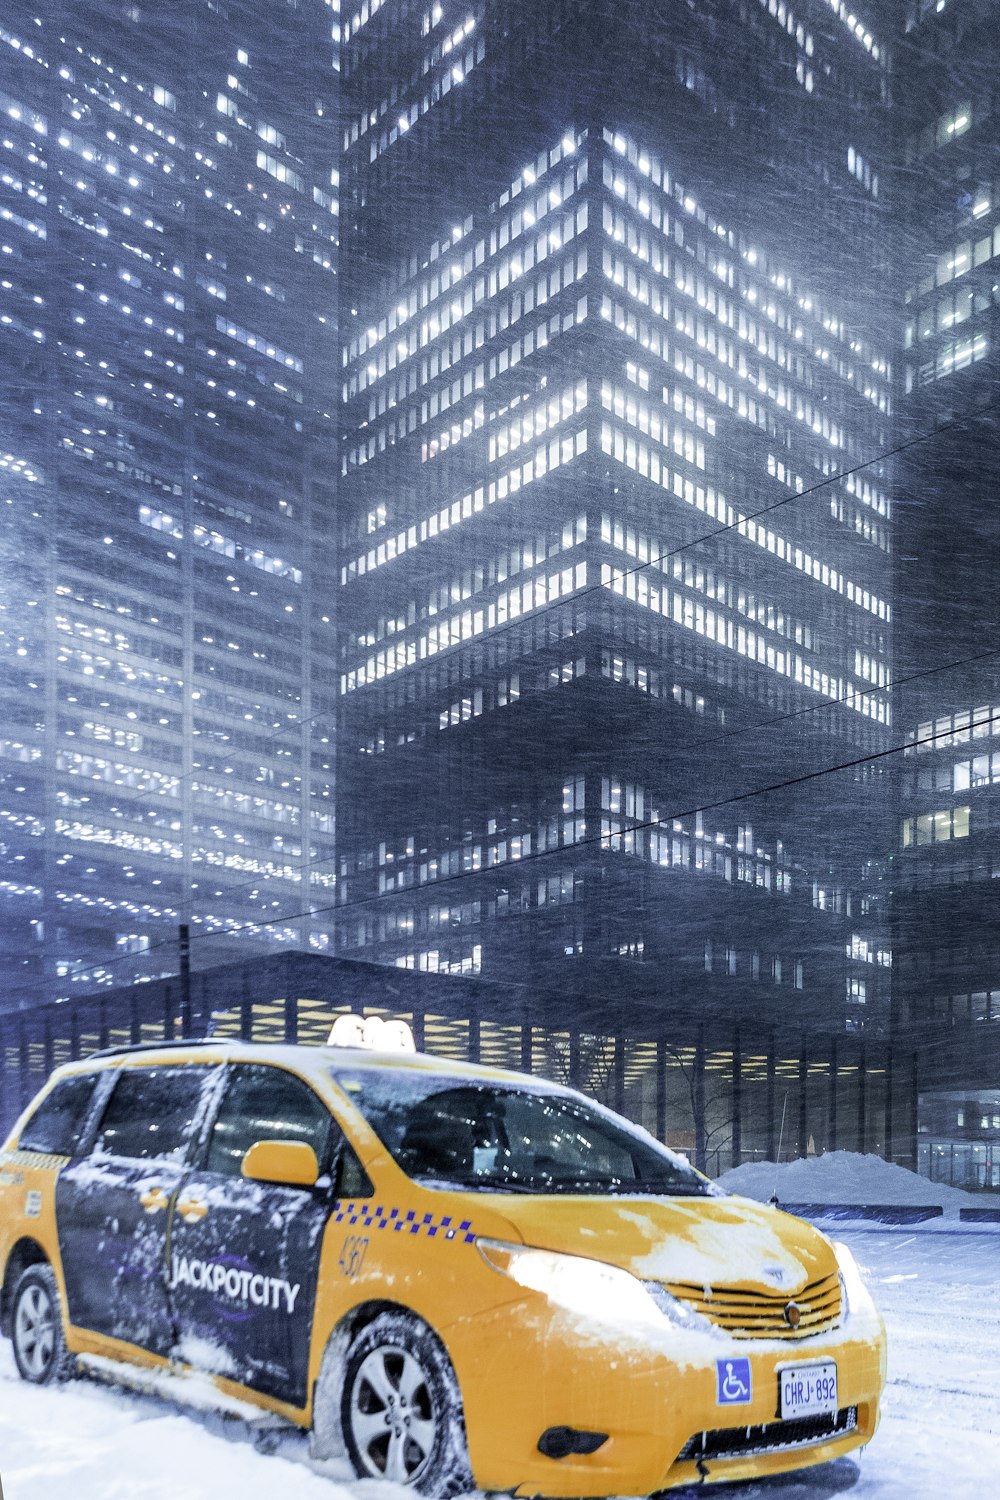 a yellow taxi cab driving through a snow covered street